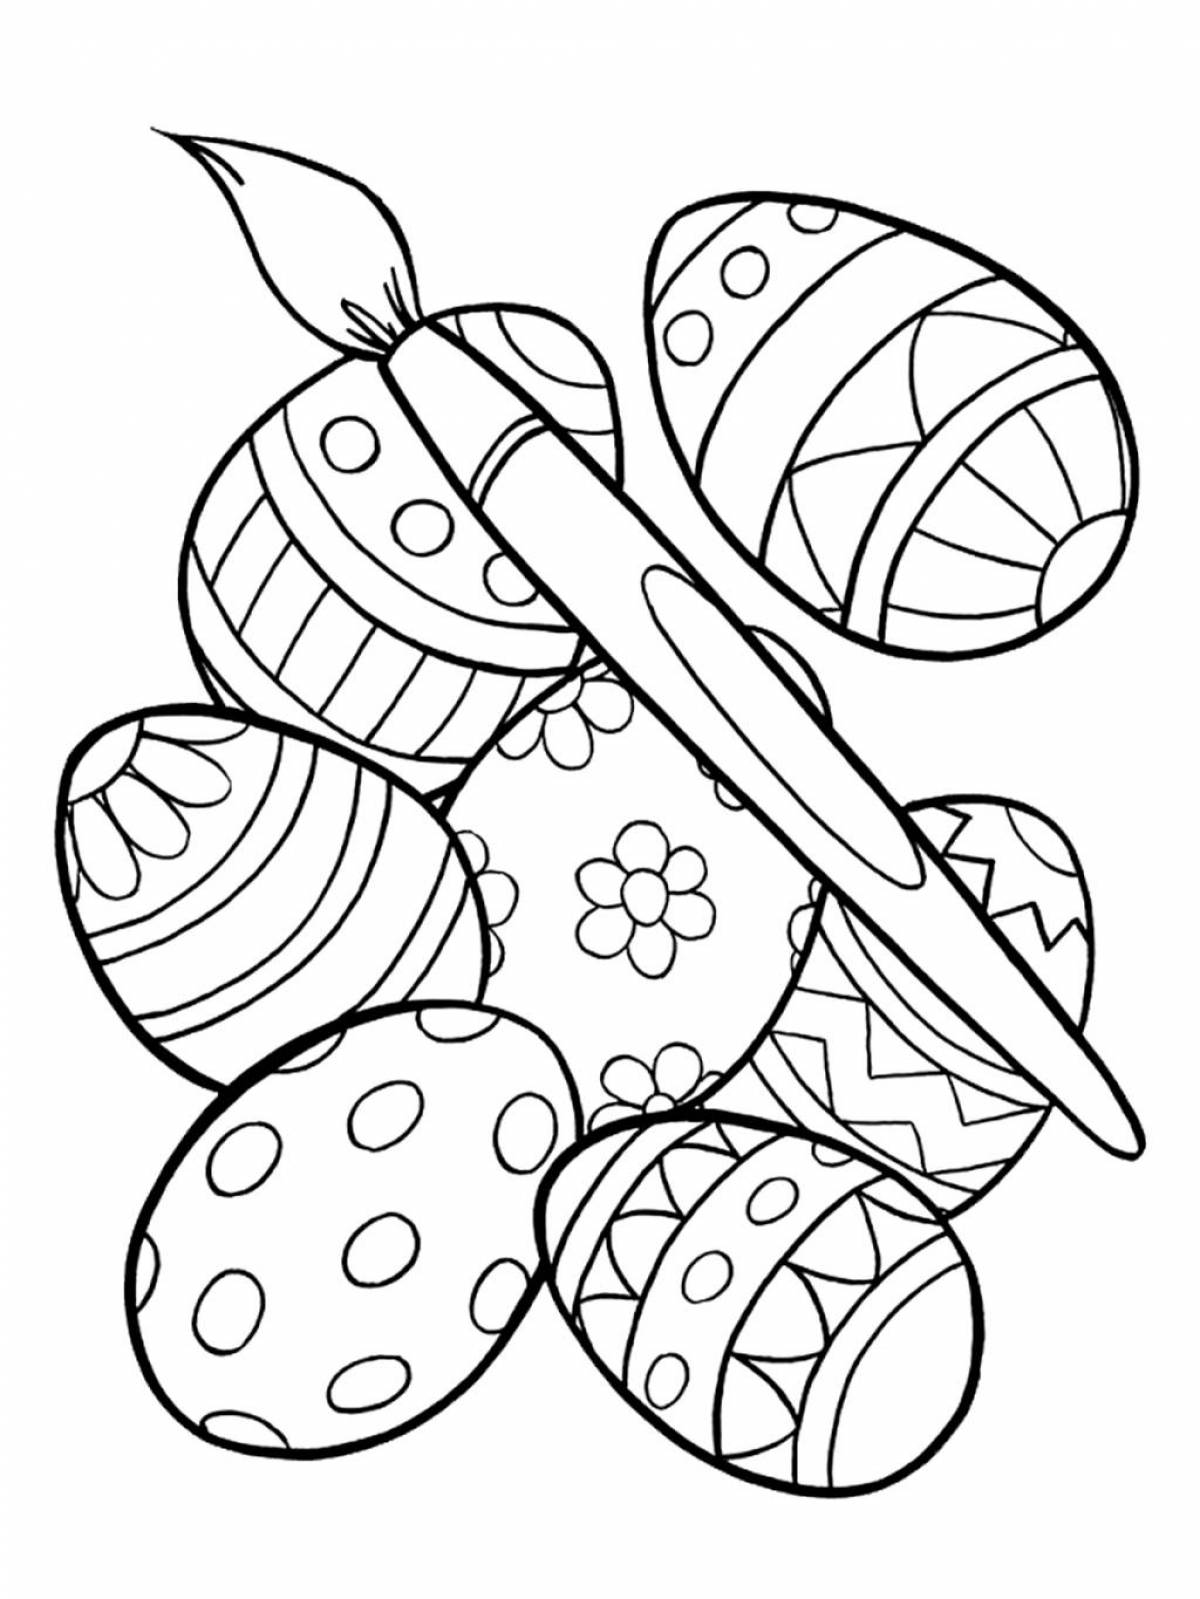 Great easter coloring book